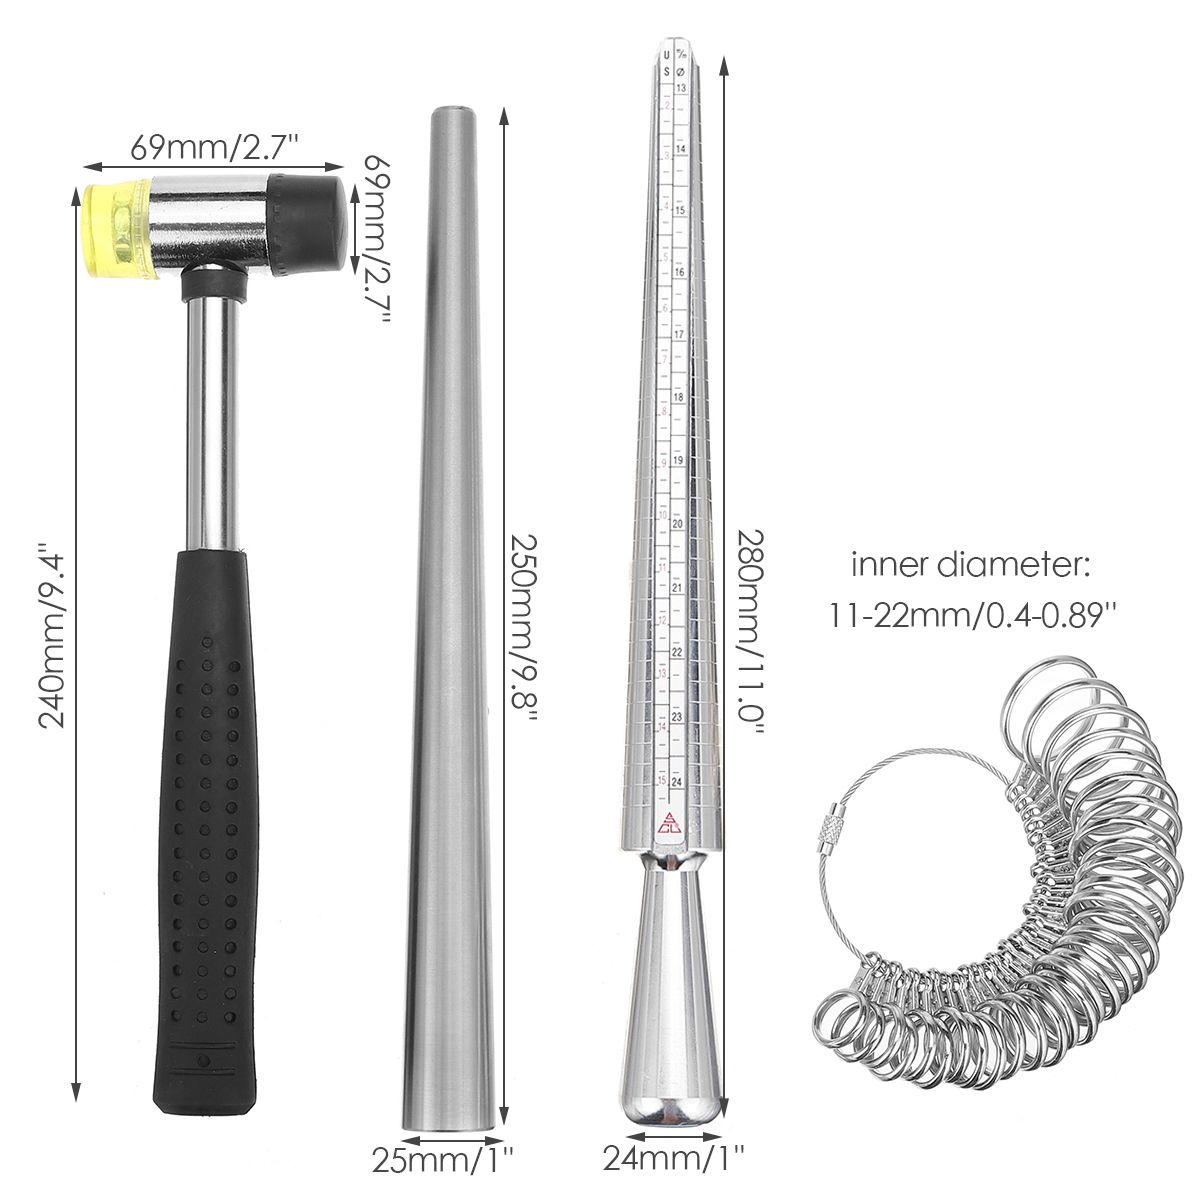 Jewelry-Measuring-Tool-Set-Alloy-Ring-Size-Stick-US-Code-Ring-Ruler-Hammer-Kit-1718557